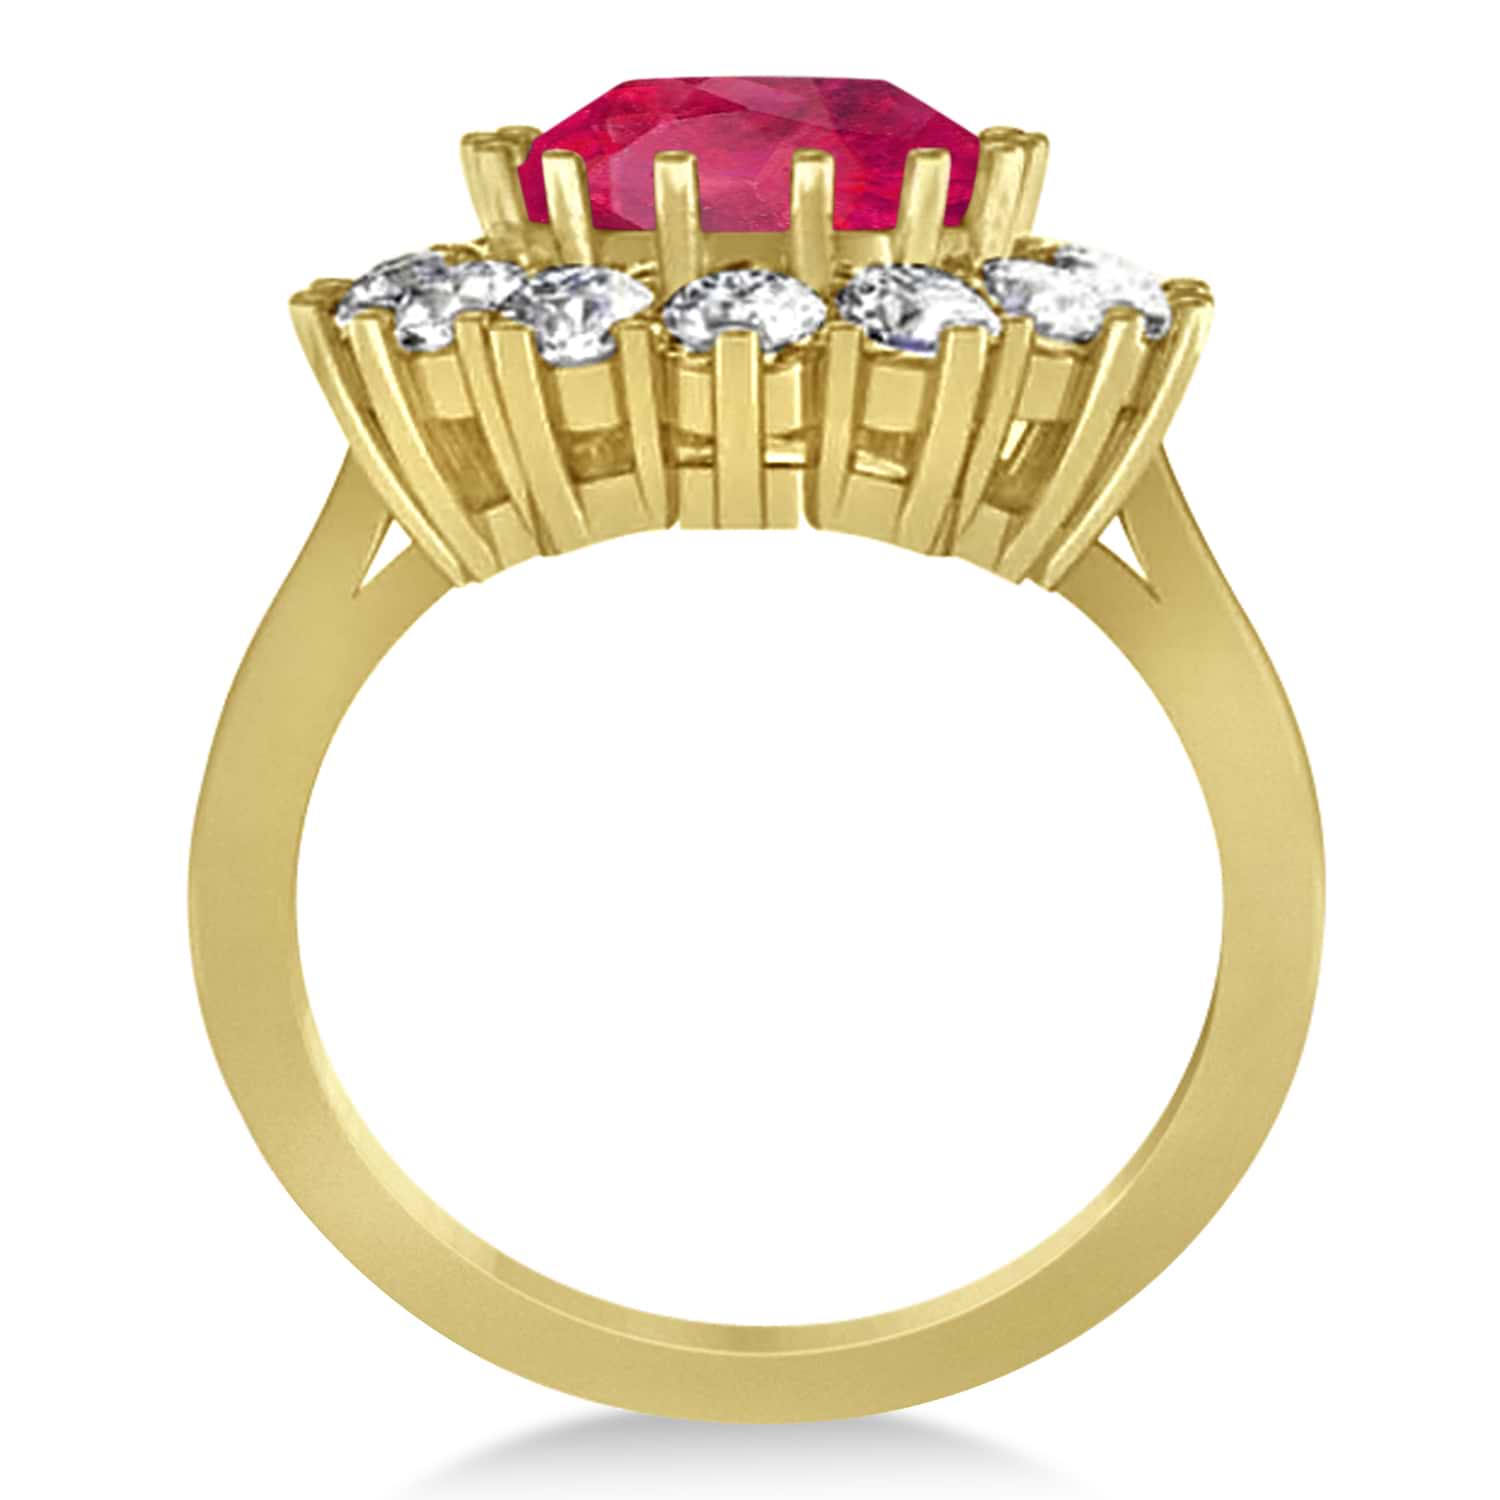 Oval Lab Ruby and Diamond Ring 14k Yellow Gold (5.40ctw)